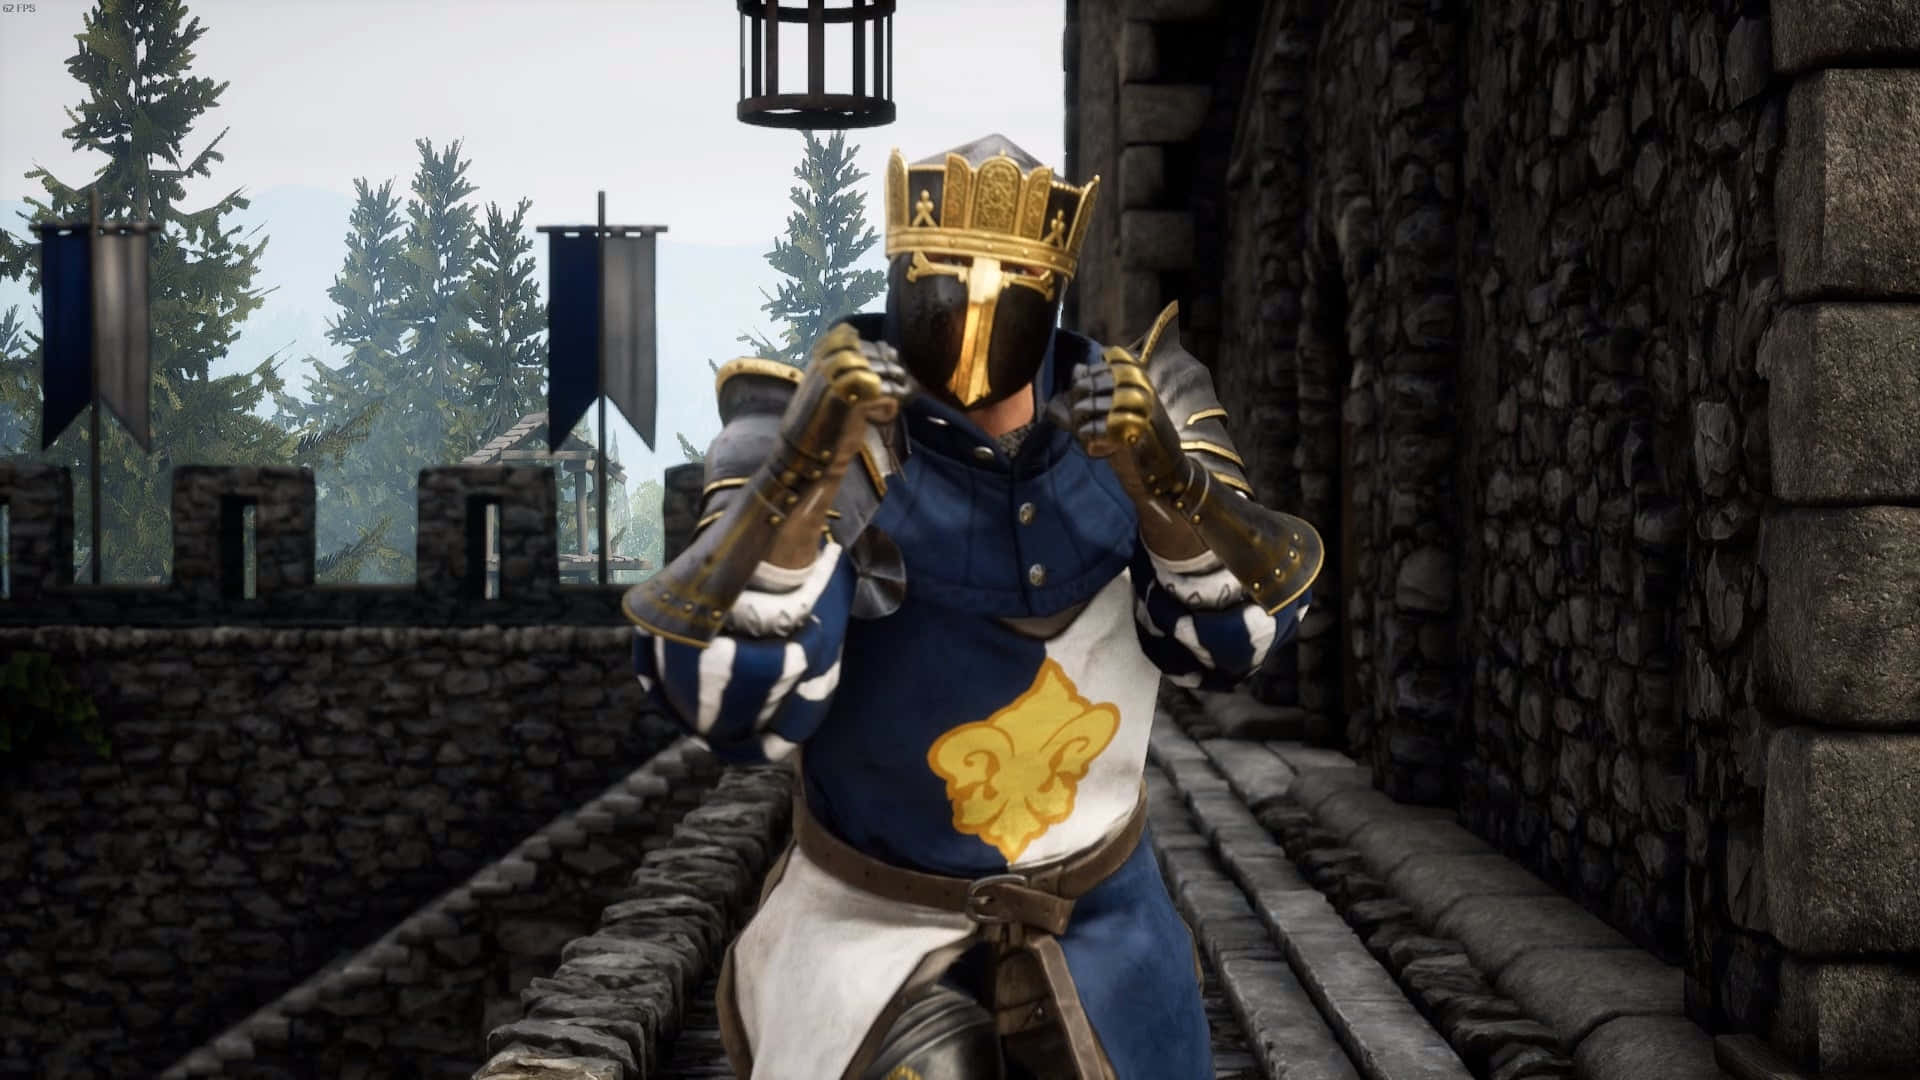 A Knight In Armor Standing In A Castle